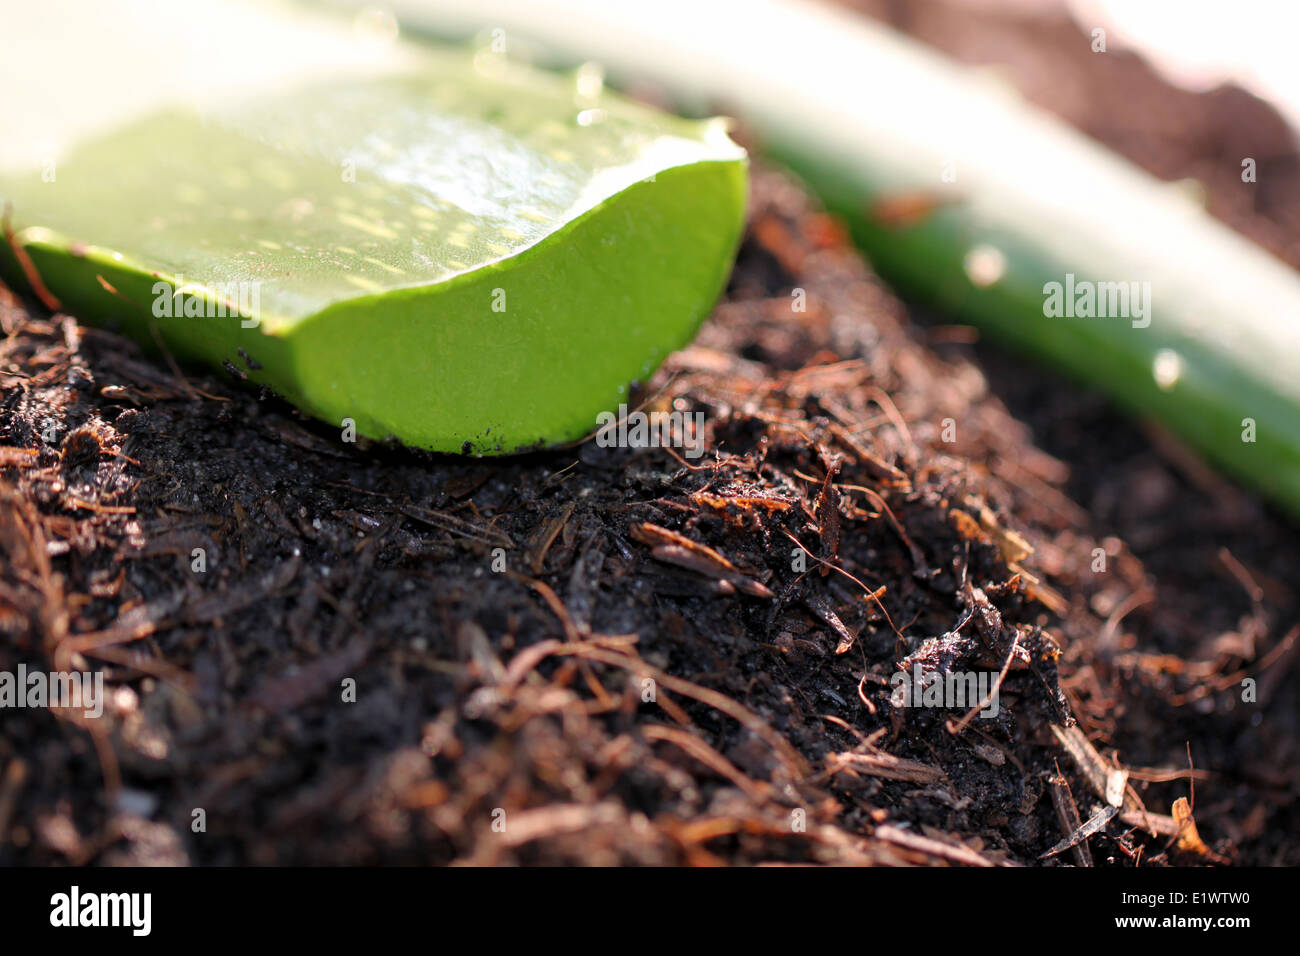 close up surface of aloe vera on ground in vegetable garden. Stock Photo